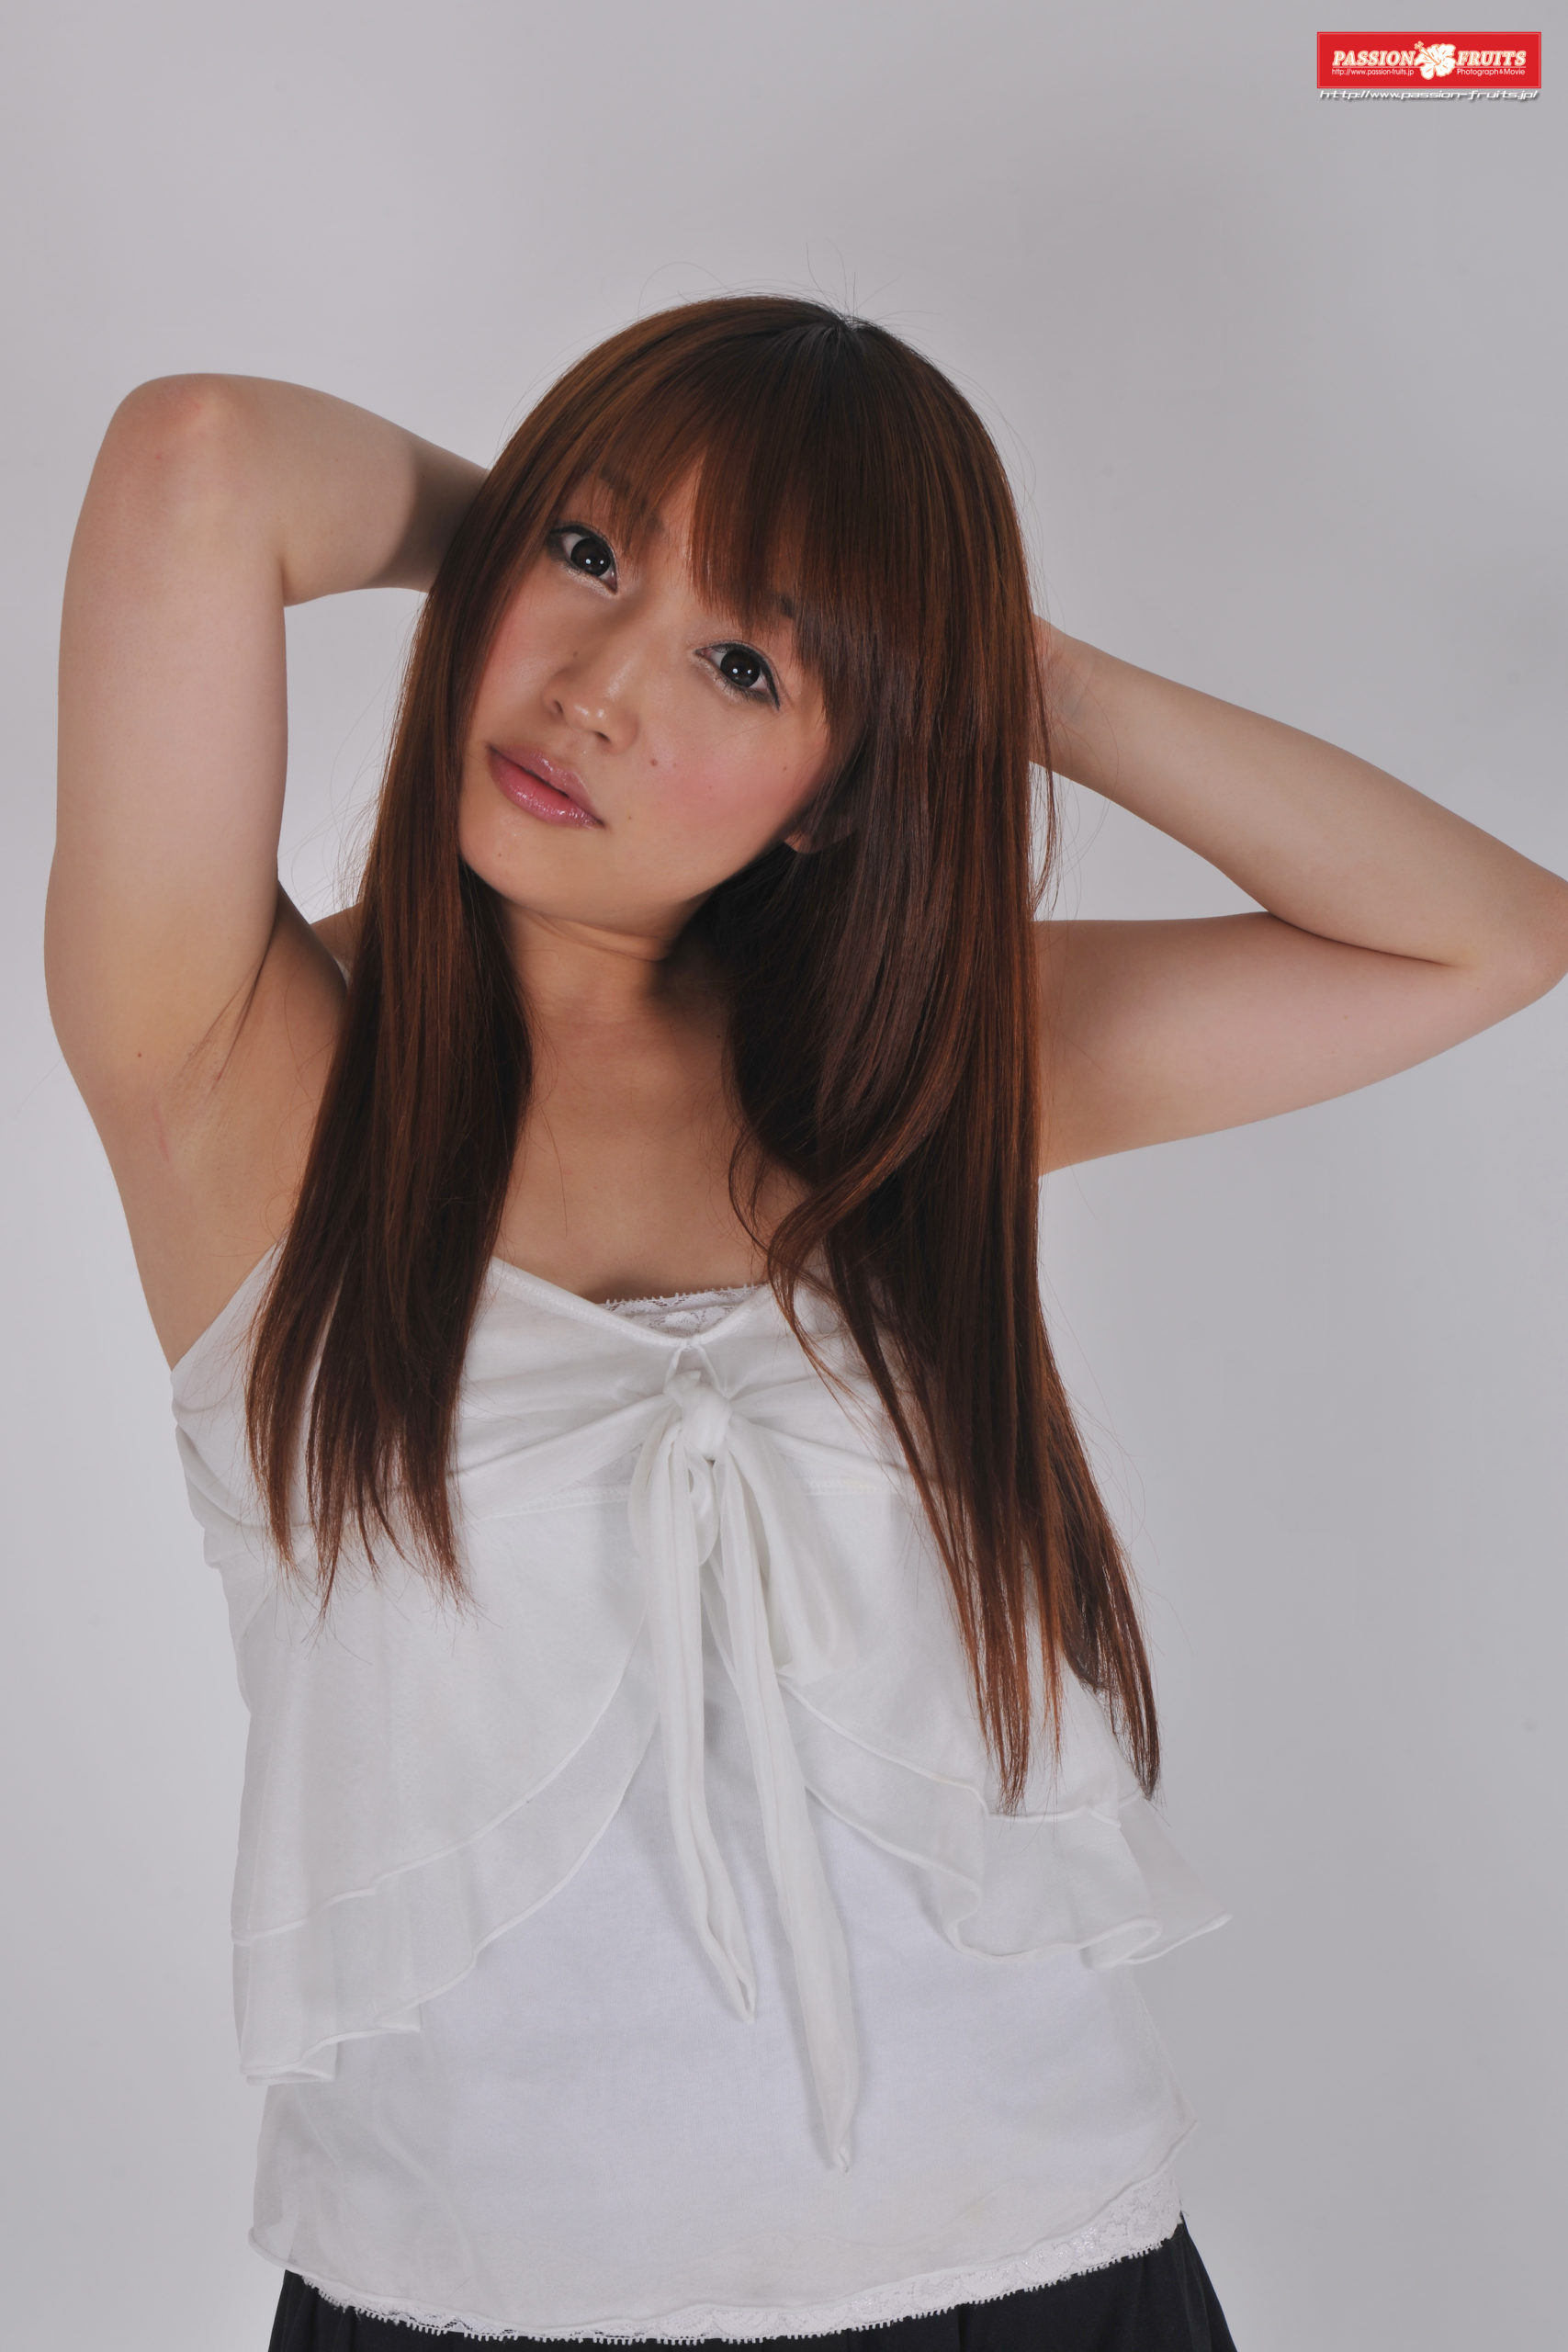 [Passion Fruits] CH609 PhotoPack 03-09 （橋元優菜さん）[90P]